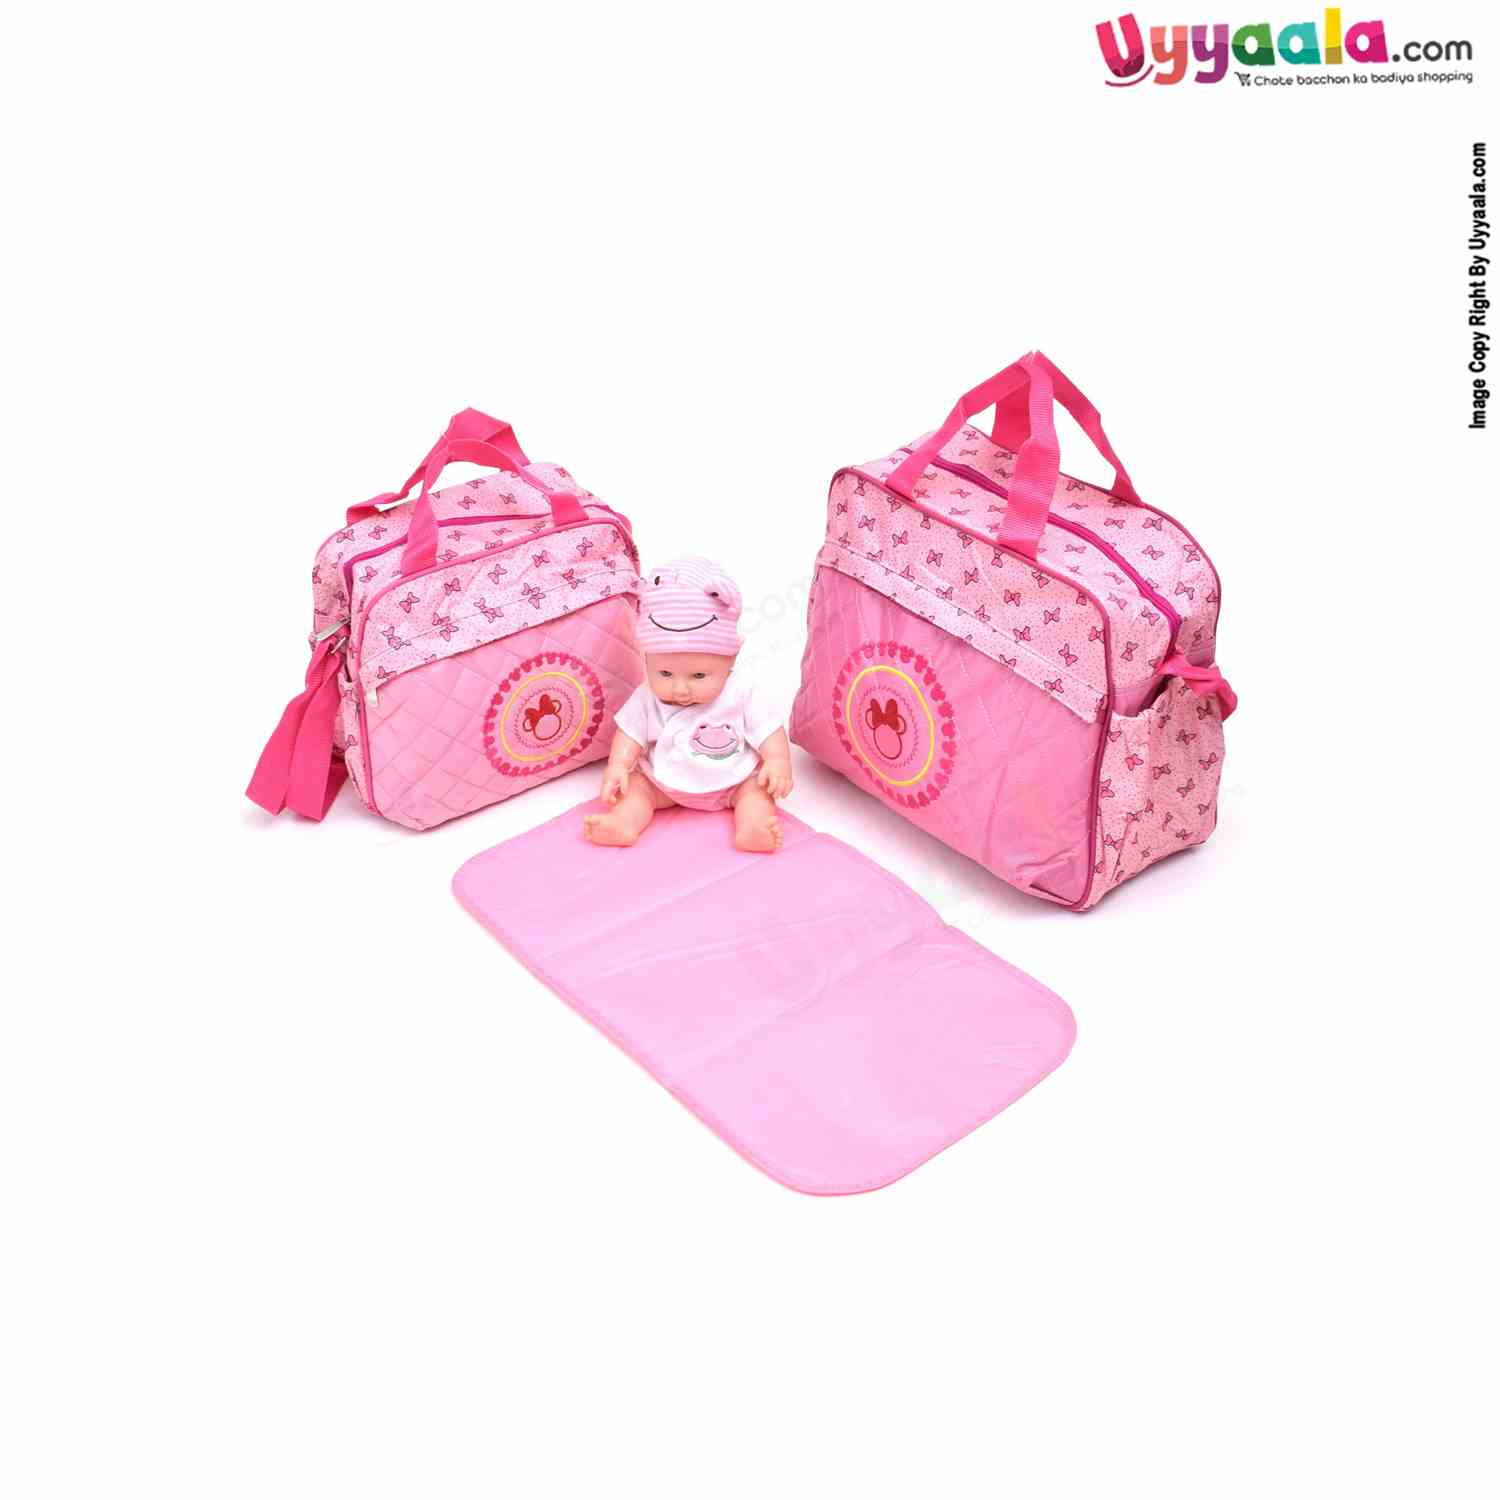 Premium Quality Multipurpose Mother Bag(Diaper Bag) with Bottle Holders & Bow Embroidery Combo of 2,Size(35*33/29*26) - Pink